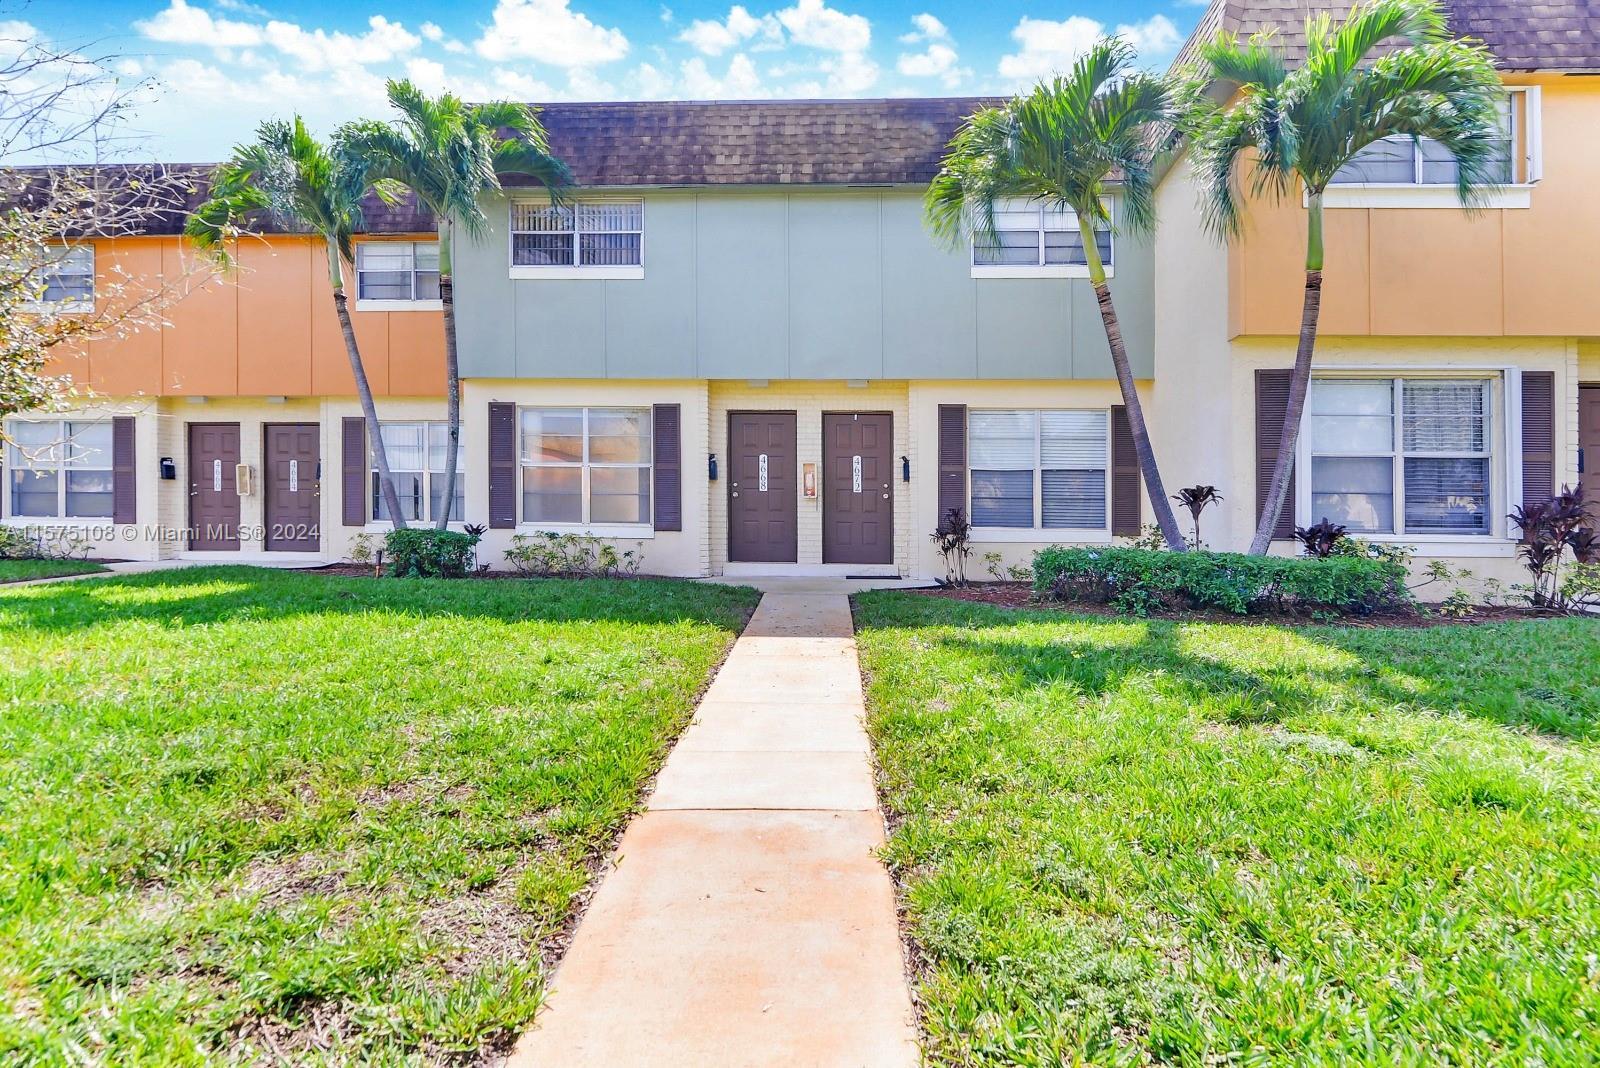 Photo of 4668 NW 9th Dr #4668 in Plantation, FL